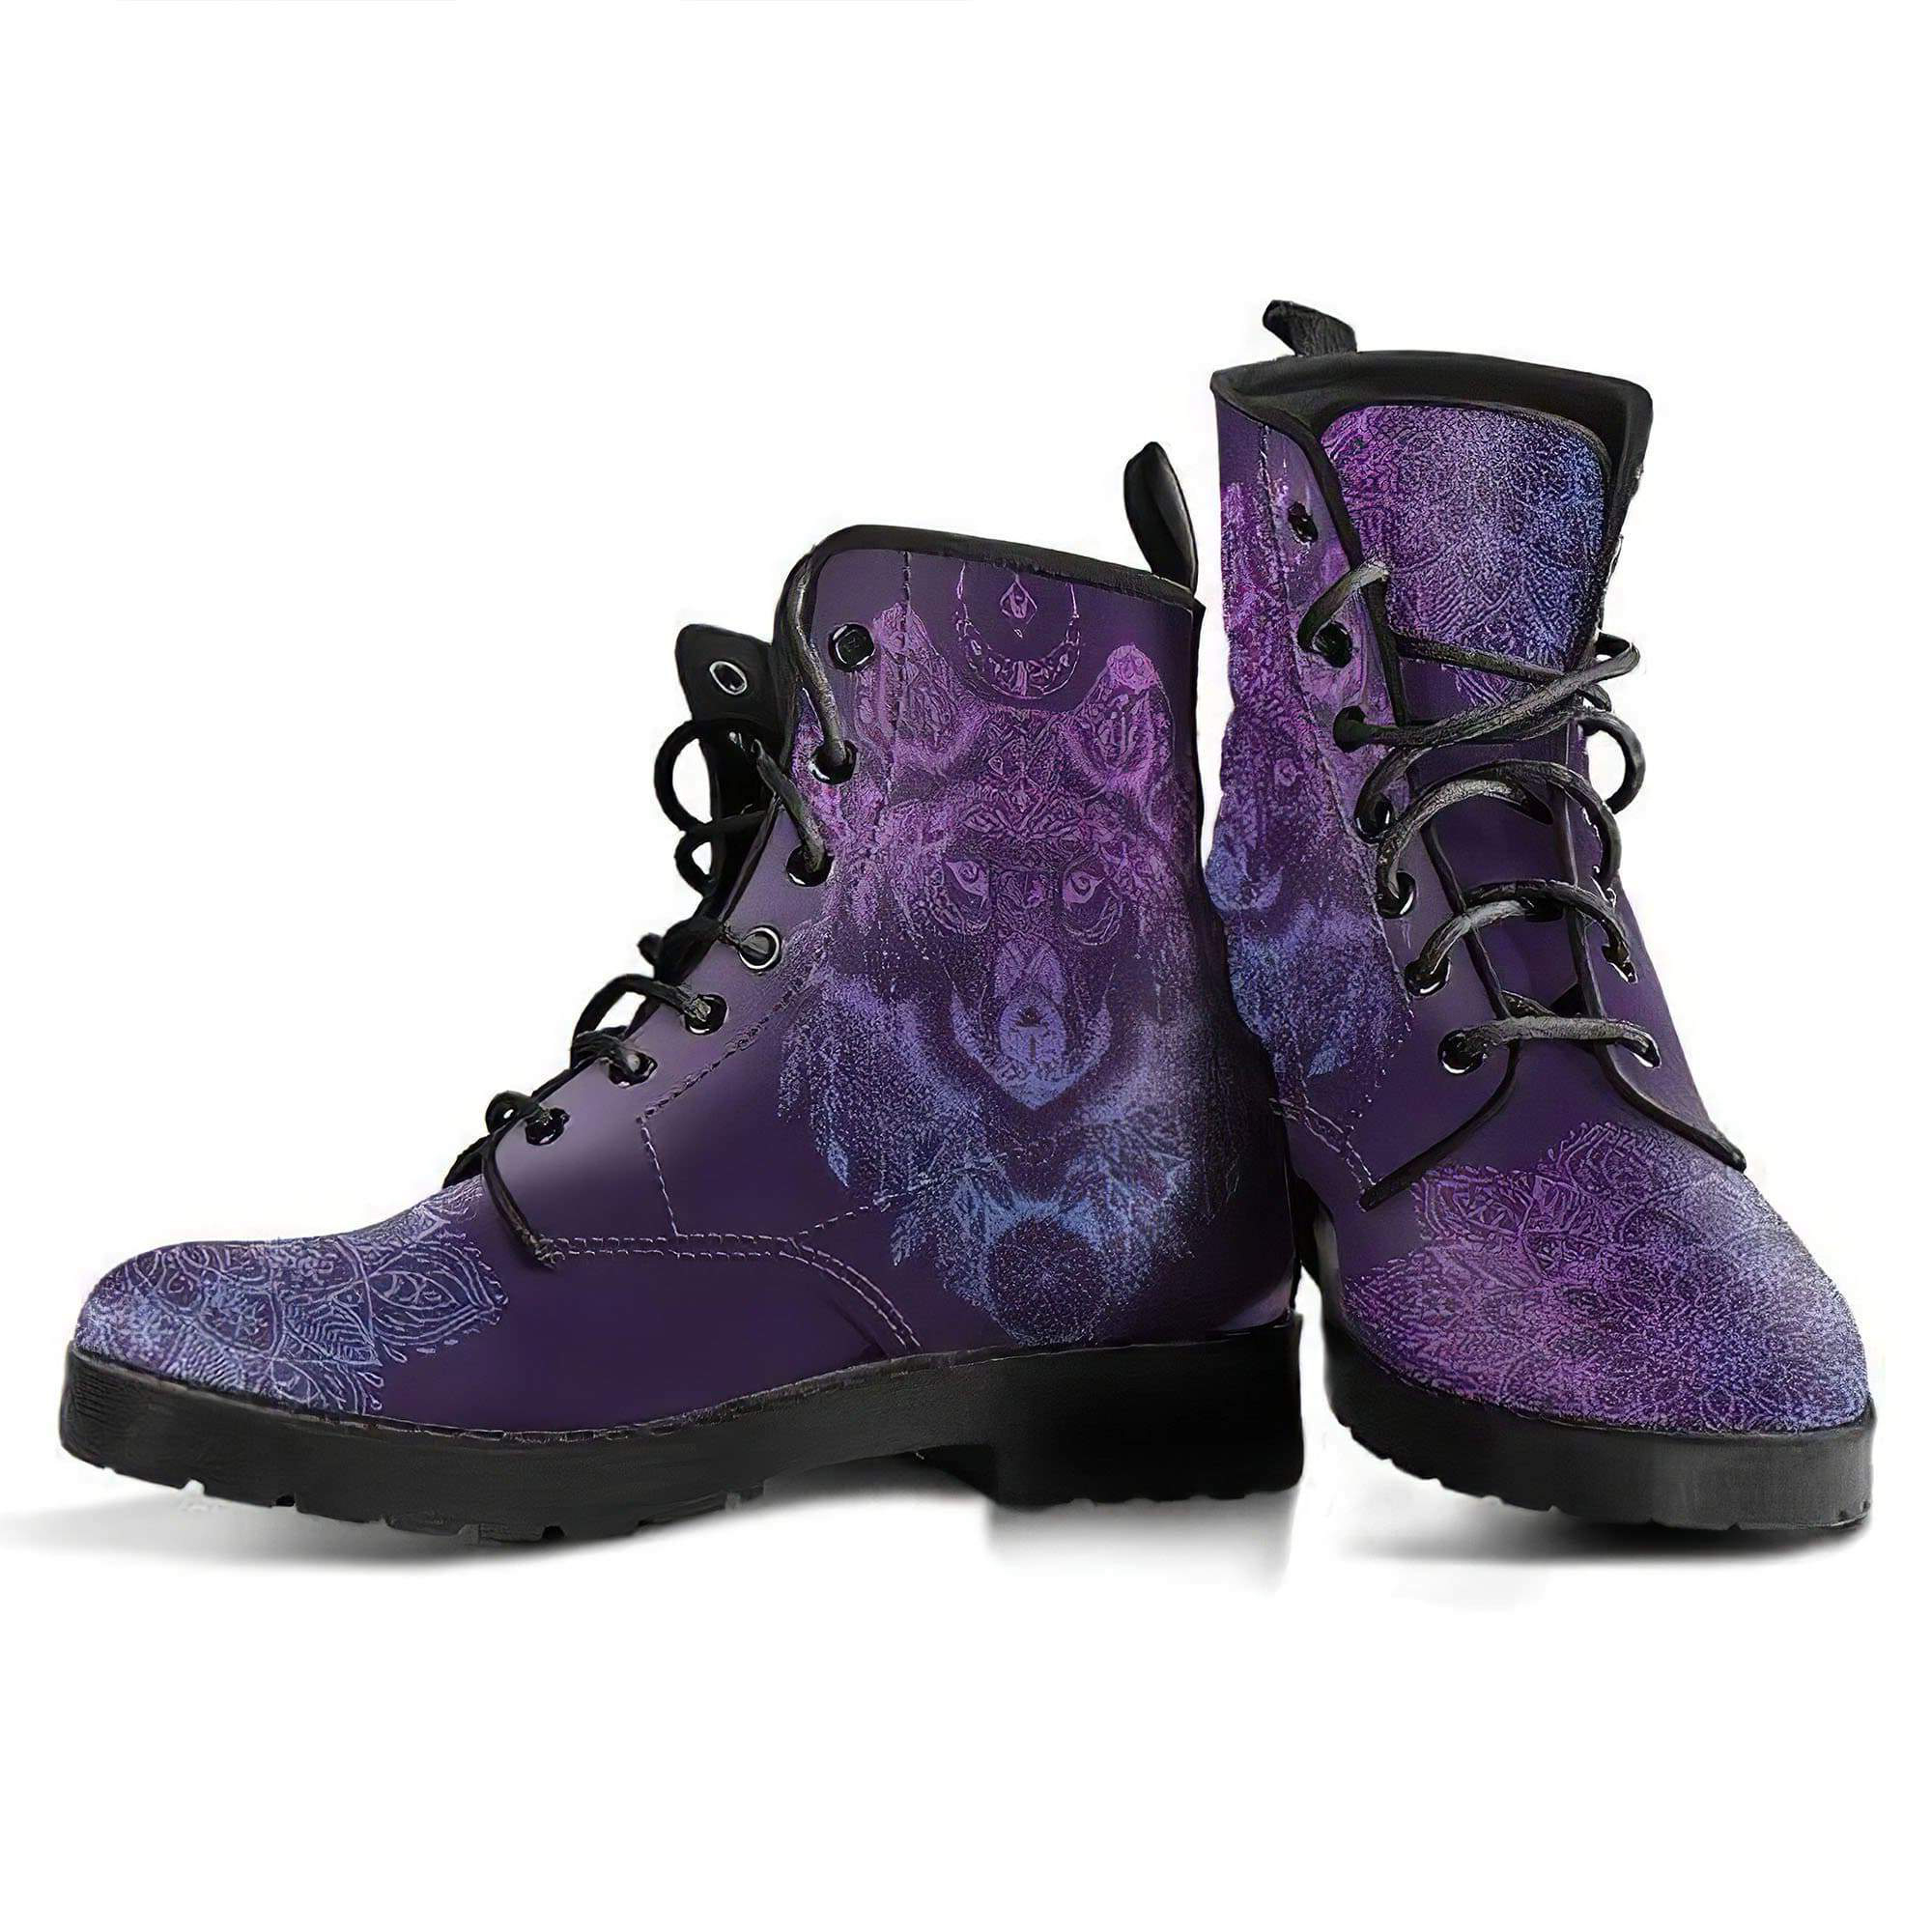 purple-wolf-handcrafted-boots-women-s-leather-boots-12051941064765.jpg